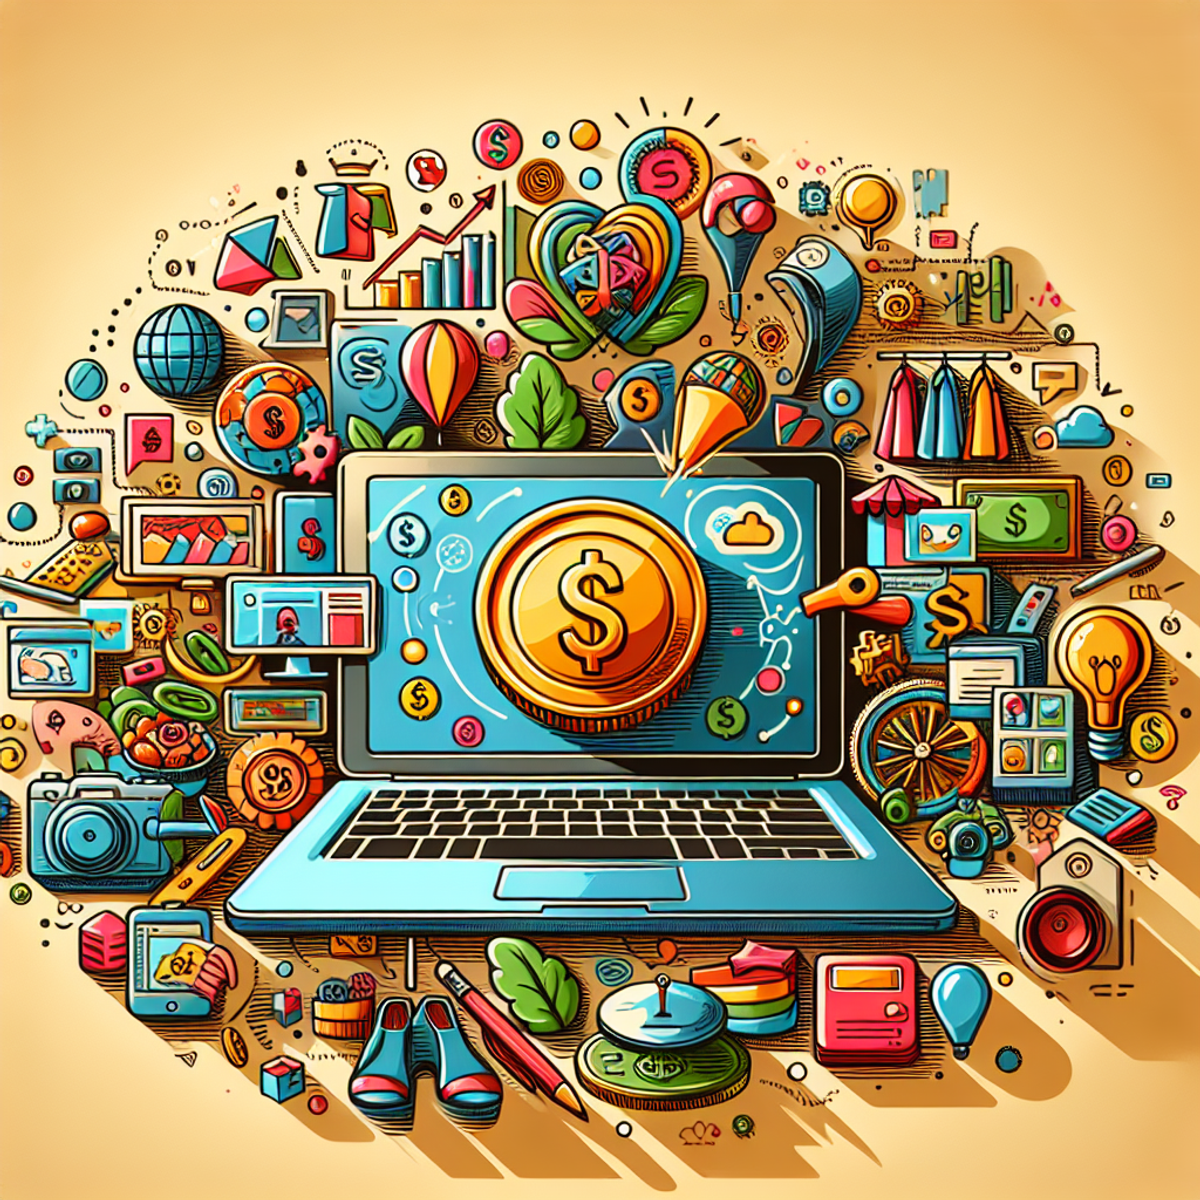 A laptop on a desk with virtual coin on the display surrounded by dynamic, colorful icons symbolizing various blogging themes such as travel, food, fashion, and technology.